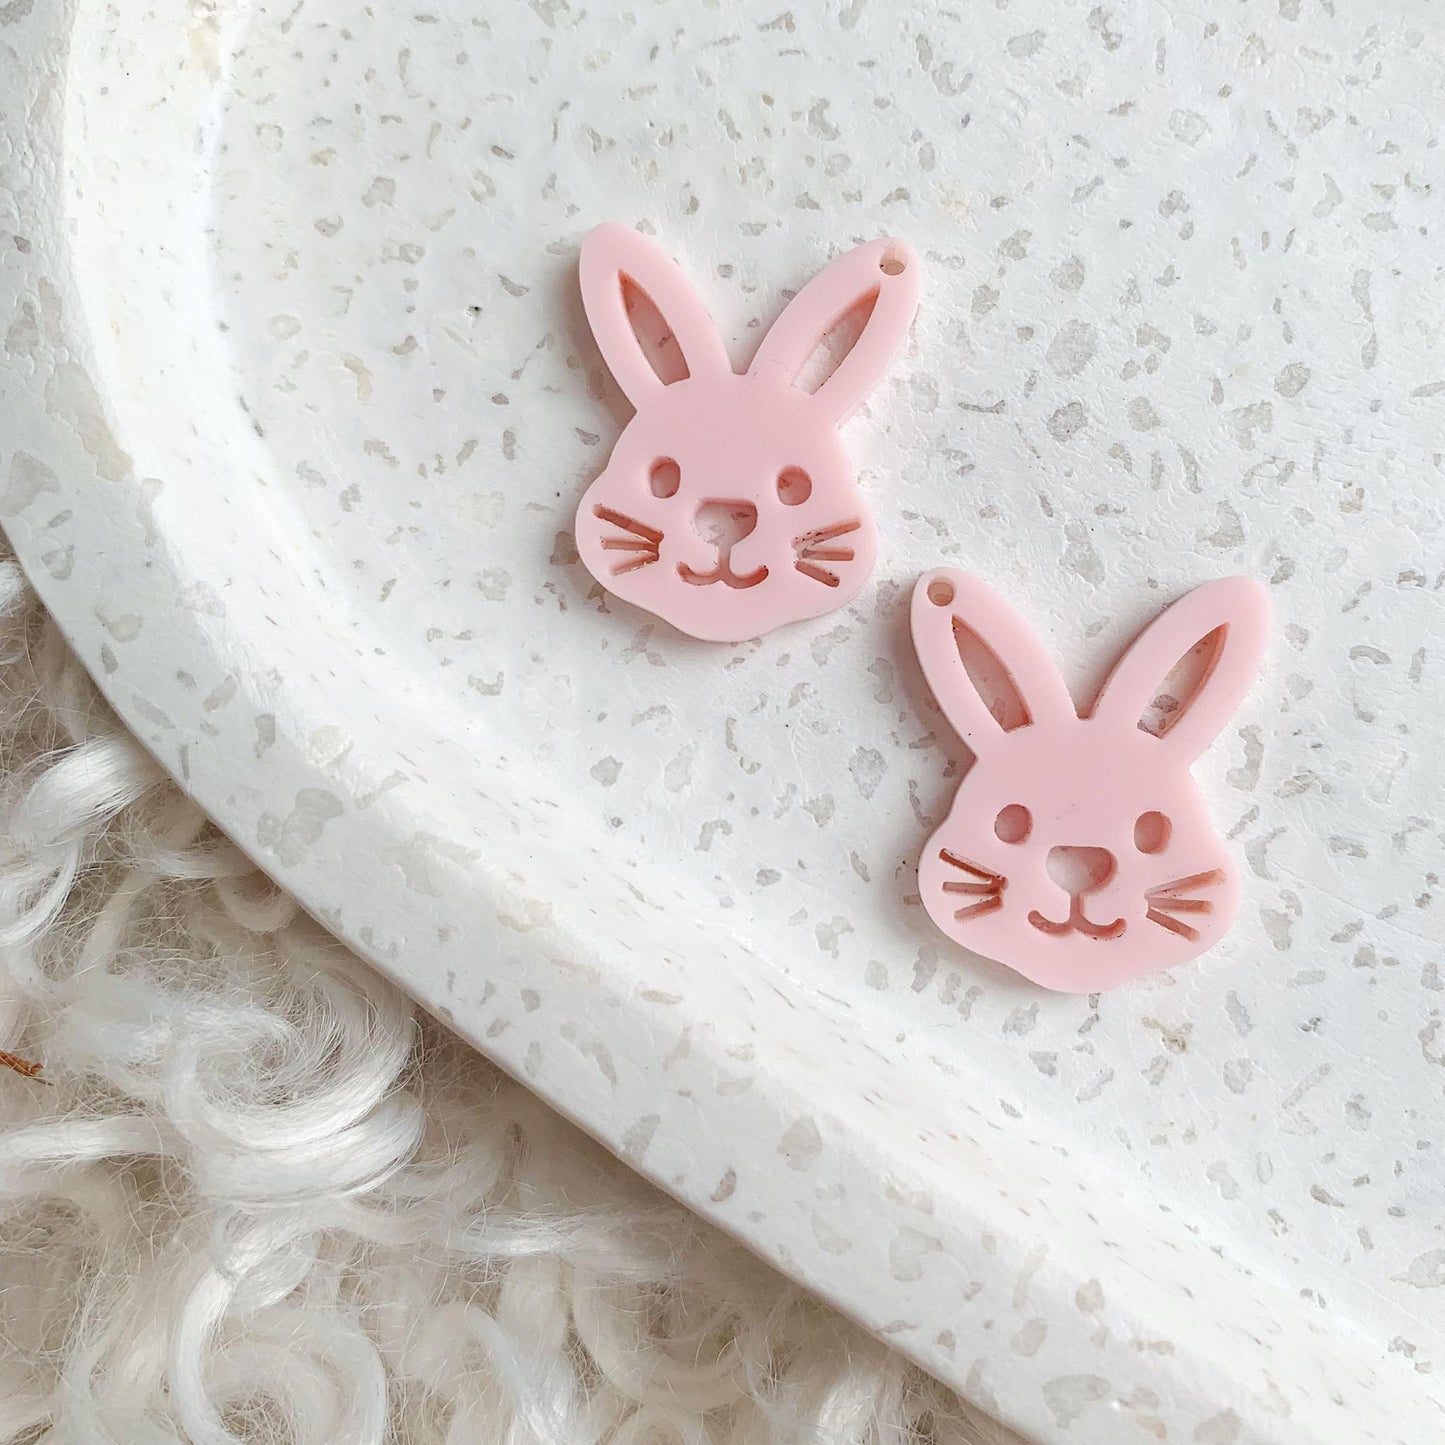 Bunny Head Silhouette Pair of Dangles